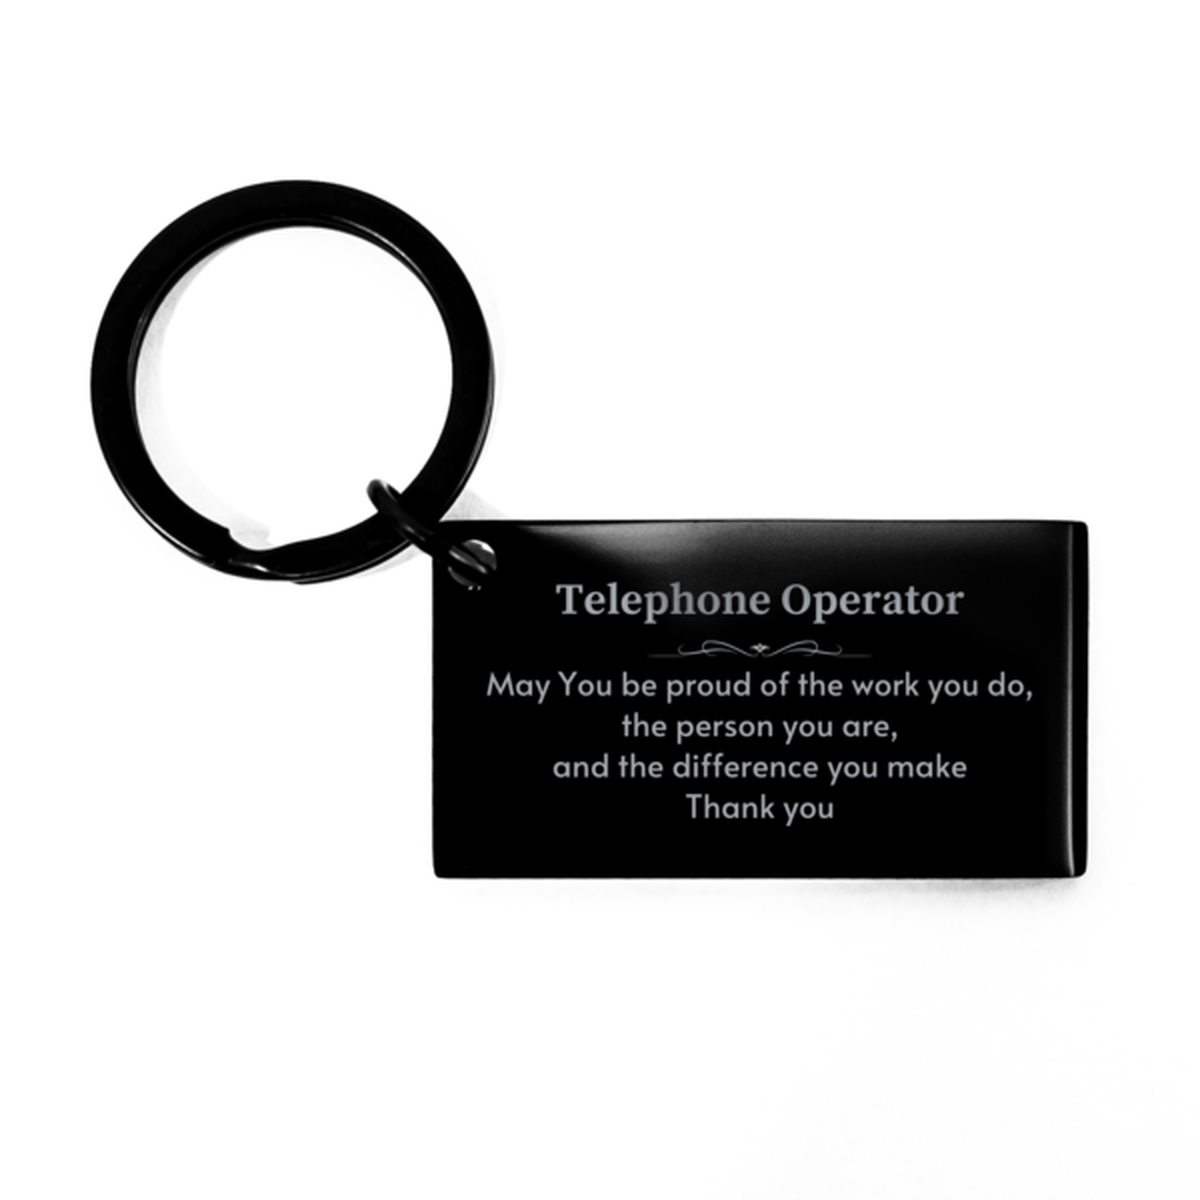 Heartwarming Keychain Retirement Coworkers Gifts for Telephone Operator, X-Ray Technician May You be proud of the work you do, the person you are Gifts for Boss Men Women Friends